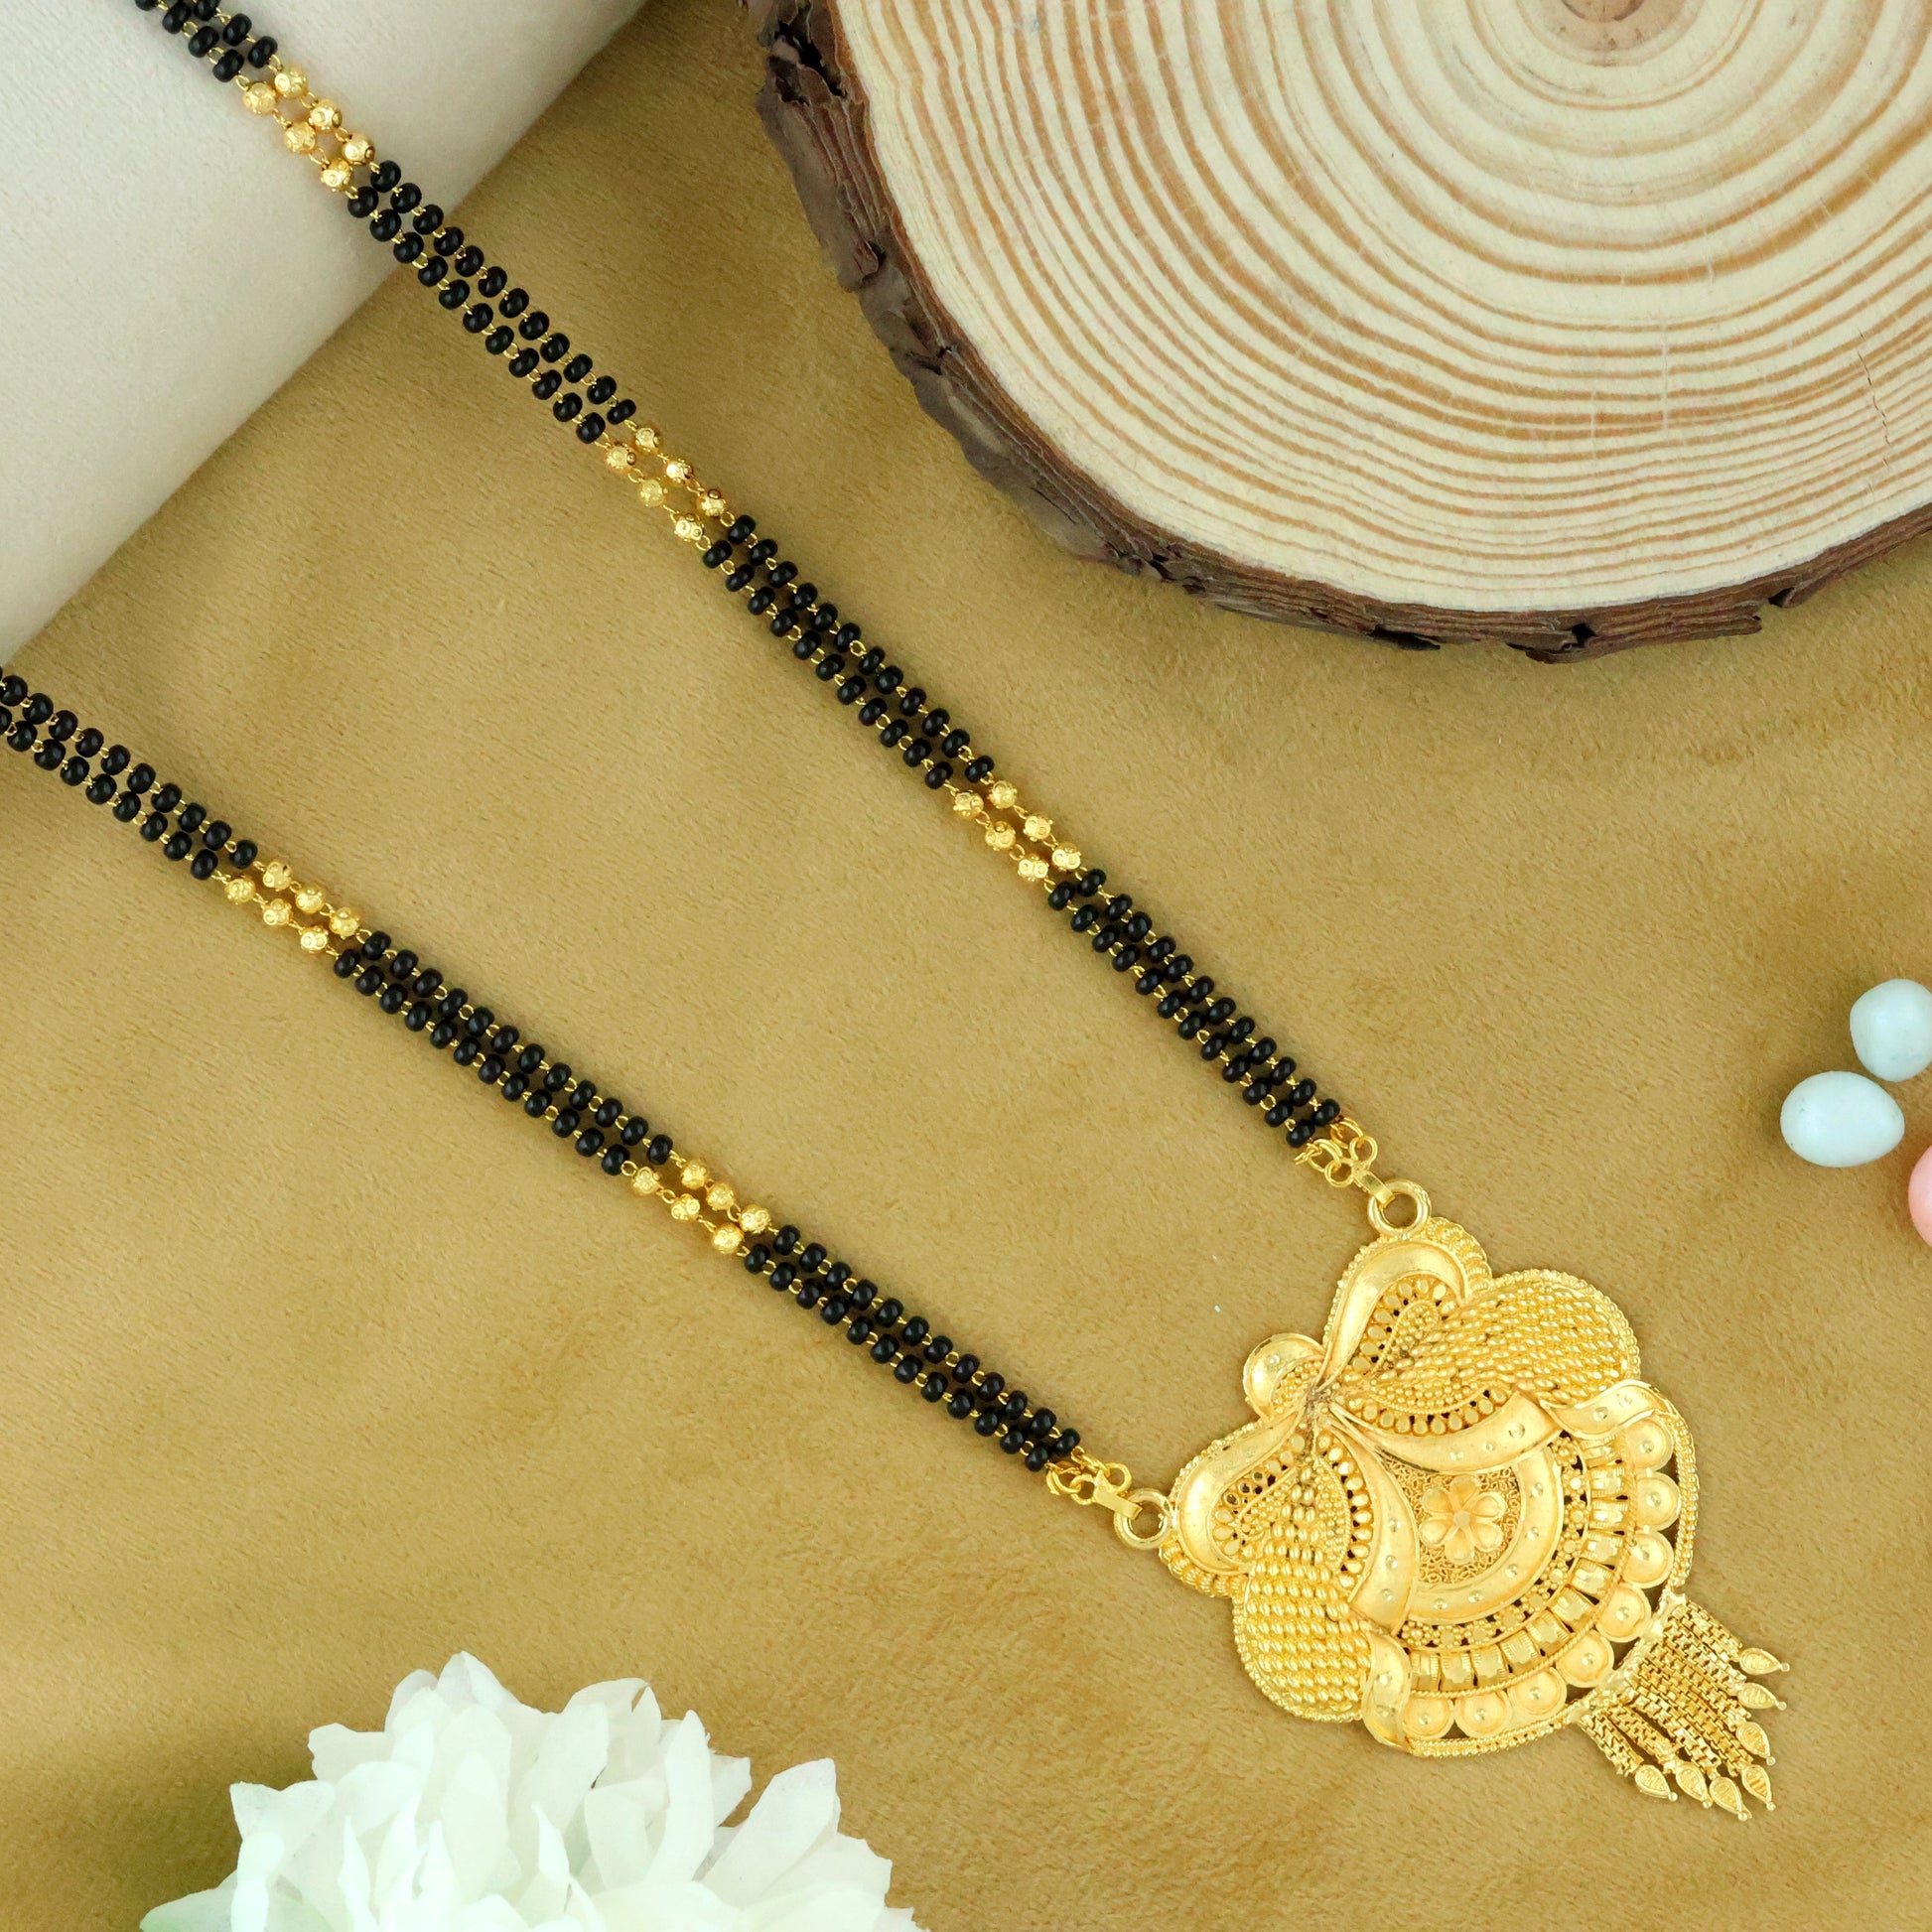 Gold Plated Mangalsutra Long Chain | Buy Mangalsutra online from Bhagya Lakshmi